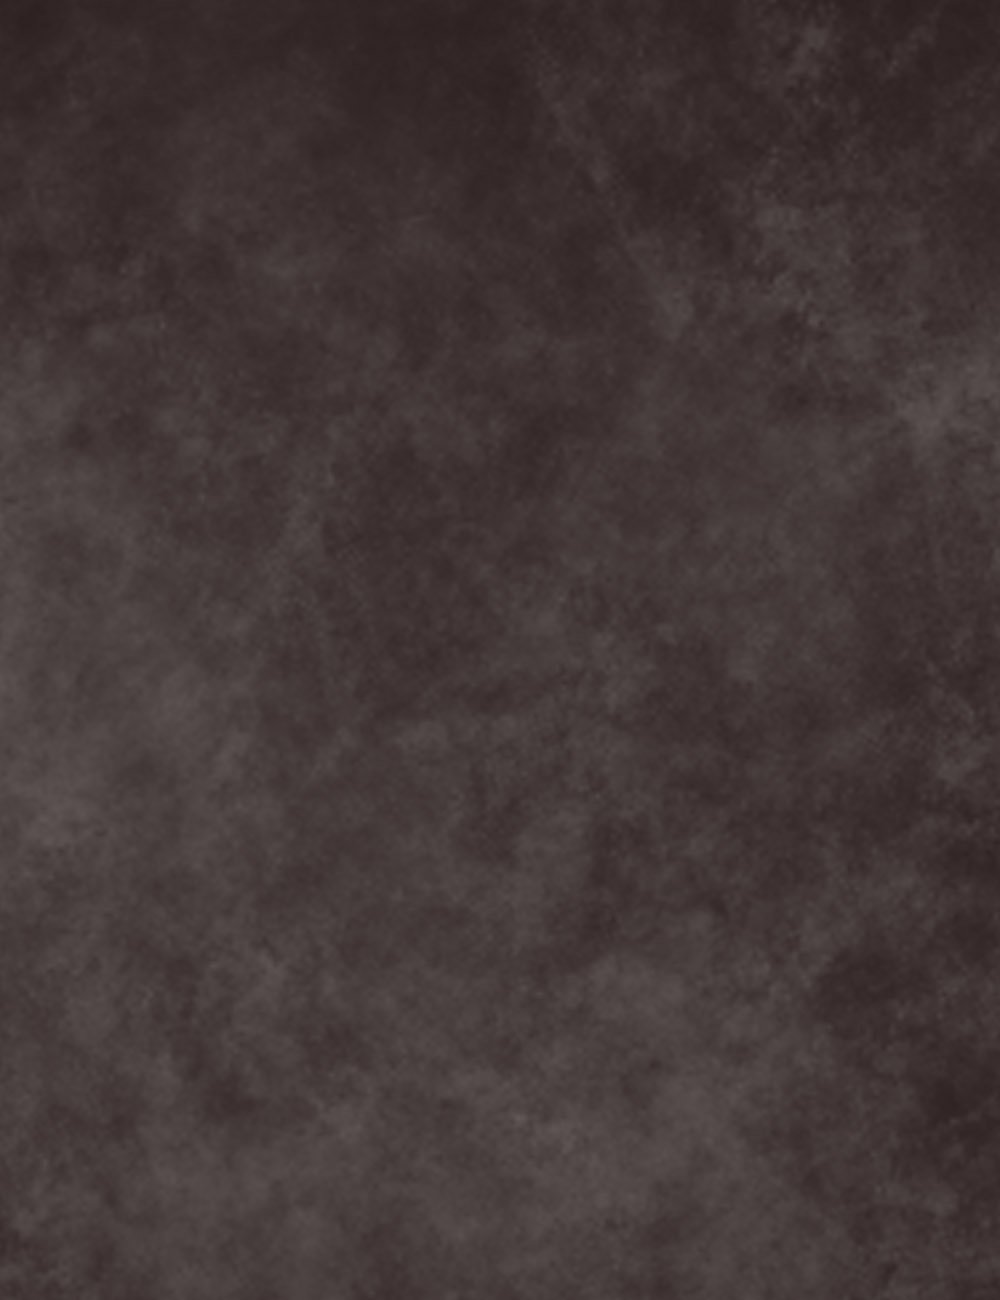 Abstract Dark Rosy Brown Texture Backdrop For Photography Shopbackdrop